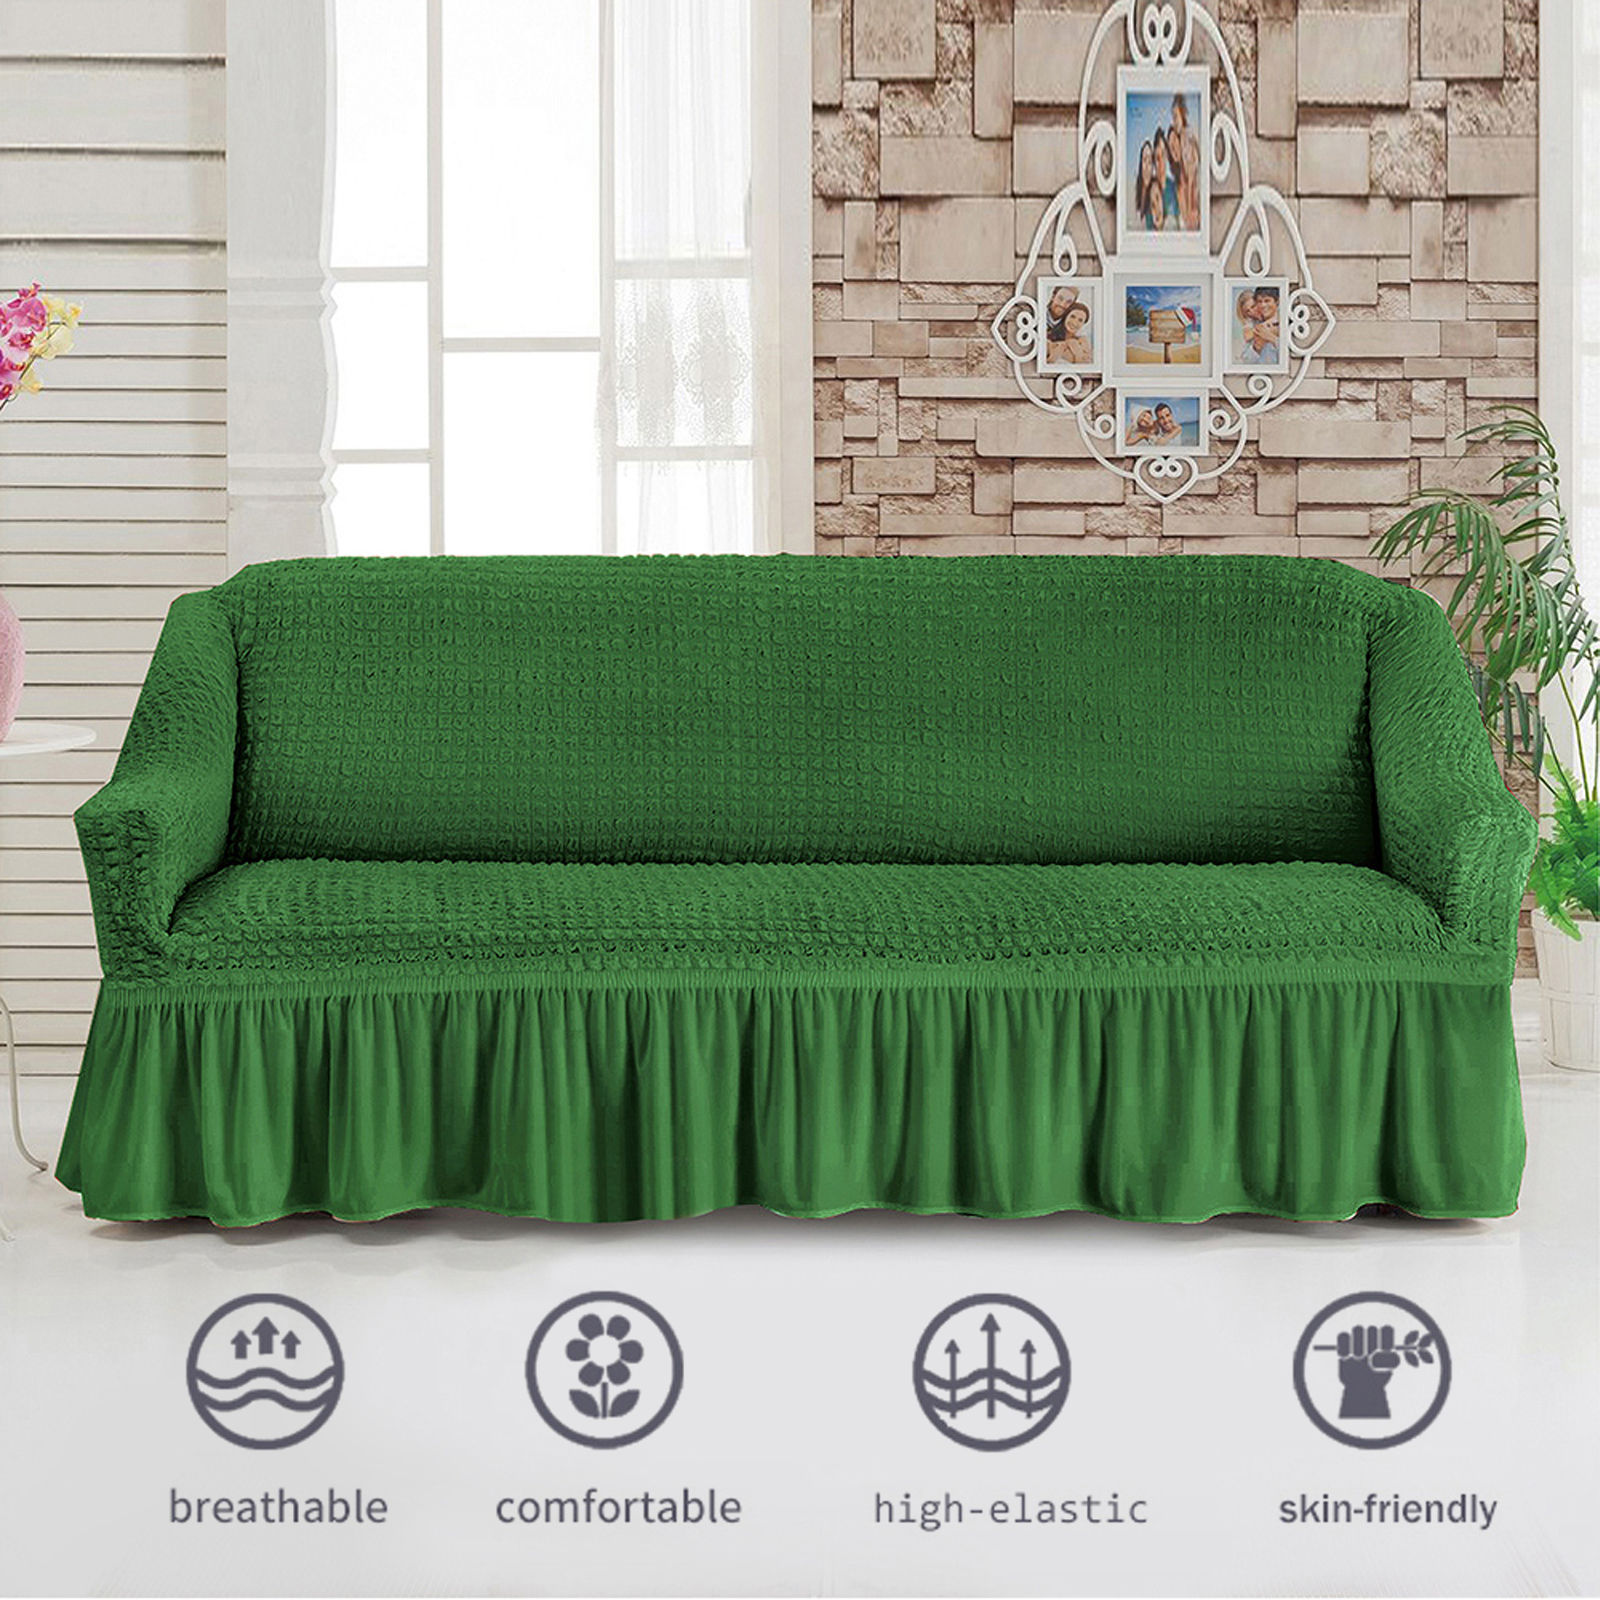 Stretch Sofa Slipcover, 3 Seater Sofa Slipcovers With Skirt With Armless Soft Sofa Cover Elastic Straps Sofa Slipcover For Living Room Kids Pets-Green A-X-Large